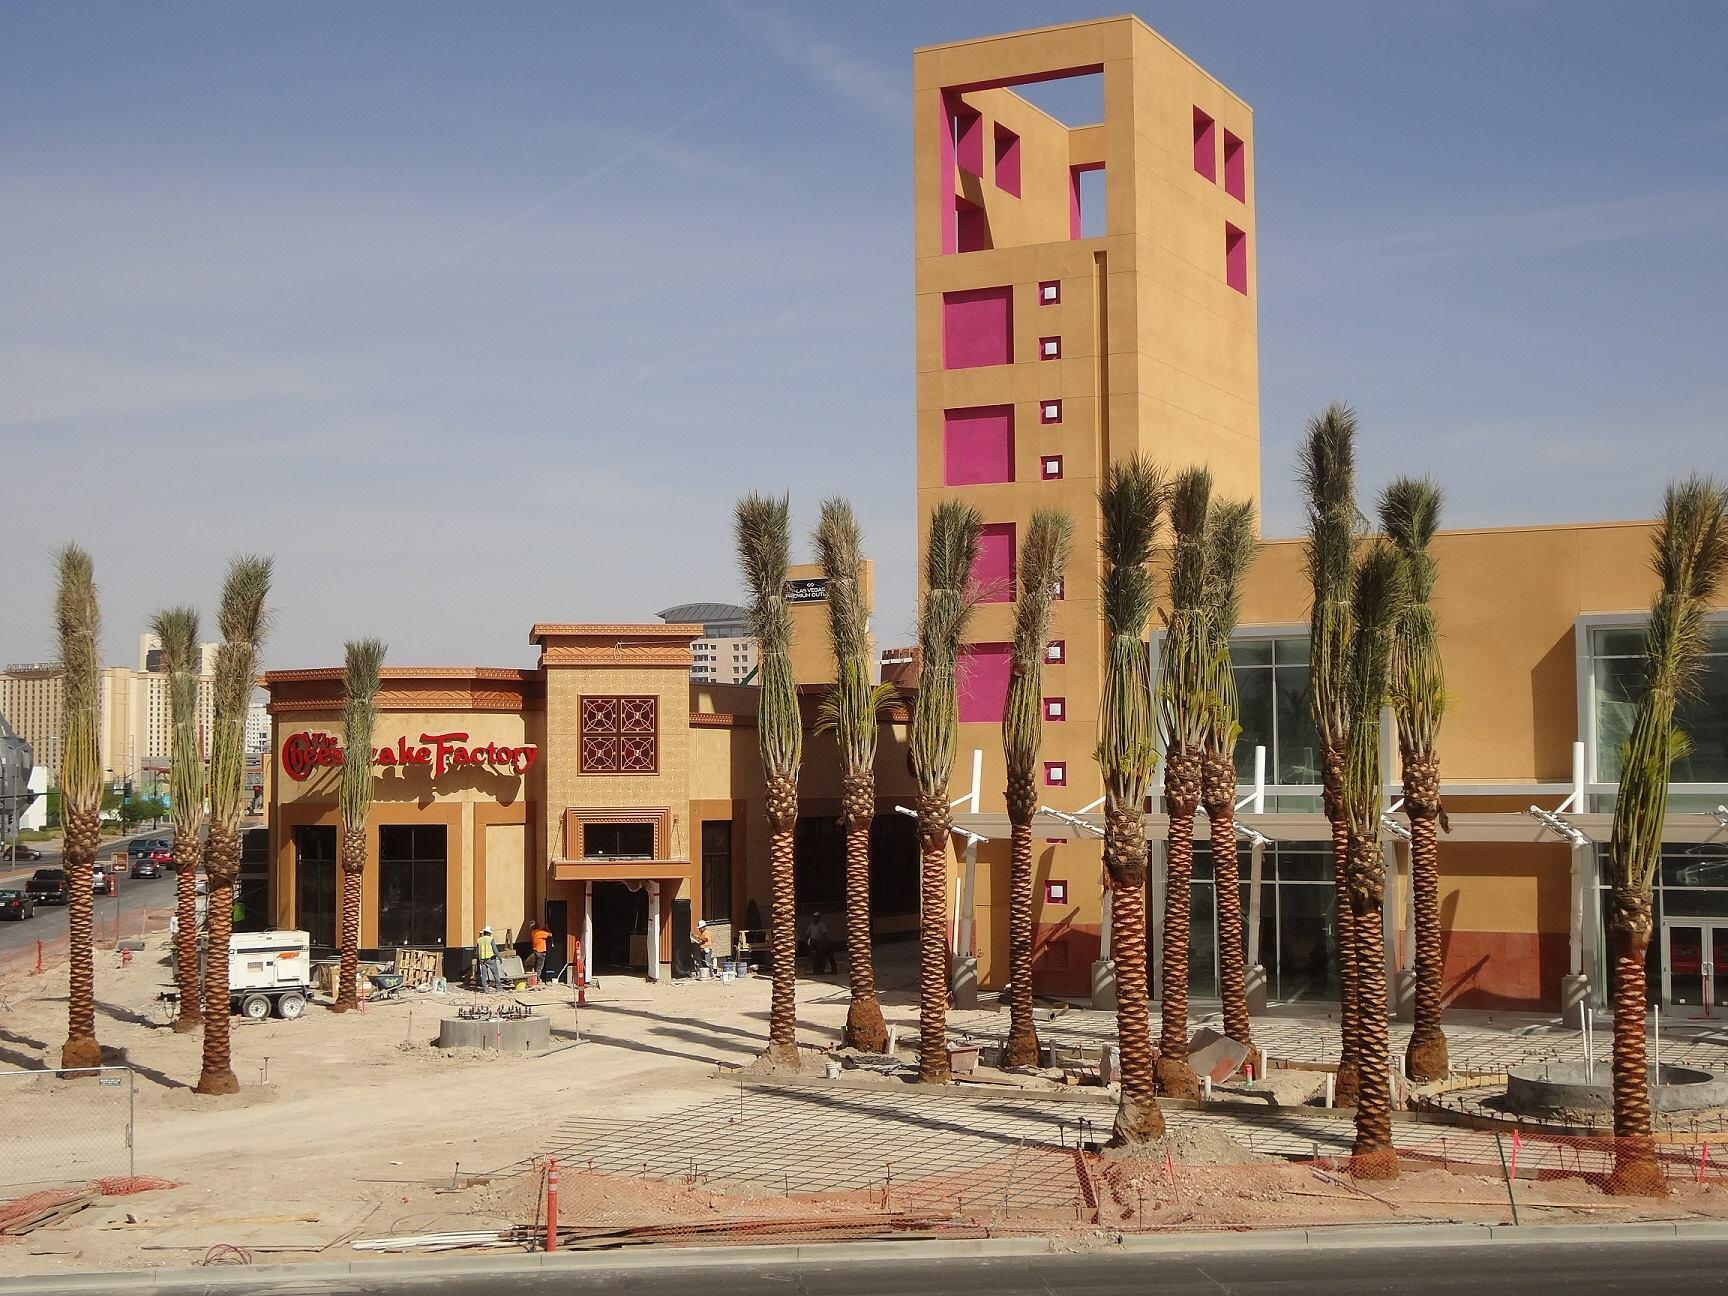 Las Vegas North Premium Outlets is one of the best places to shop